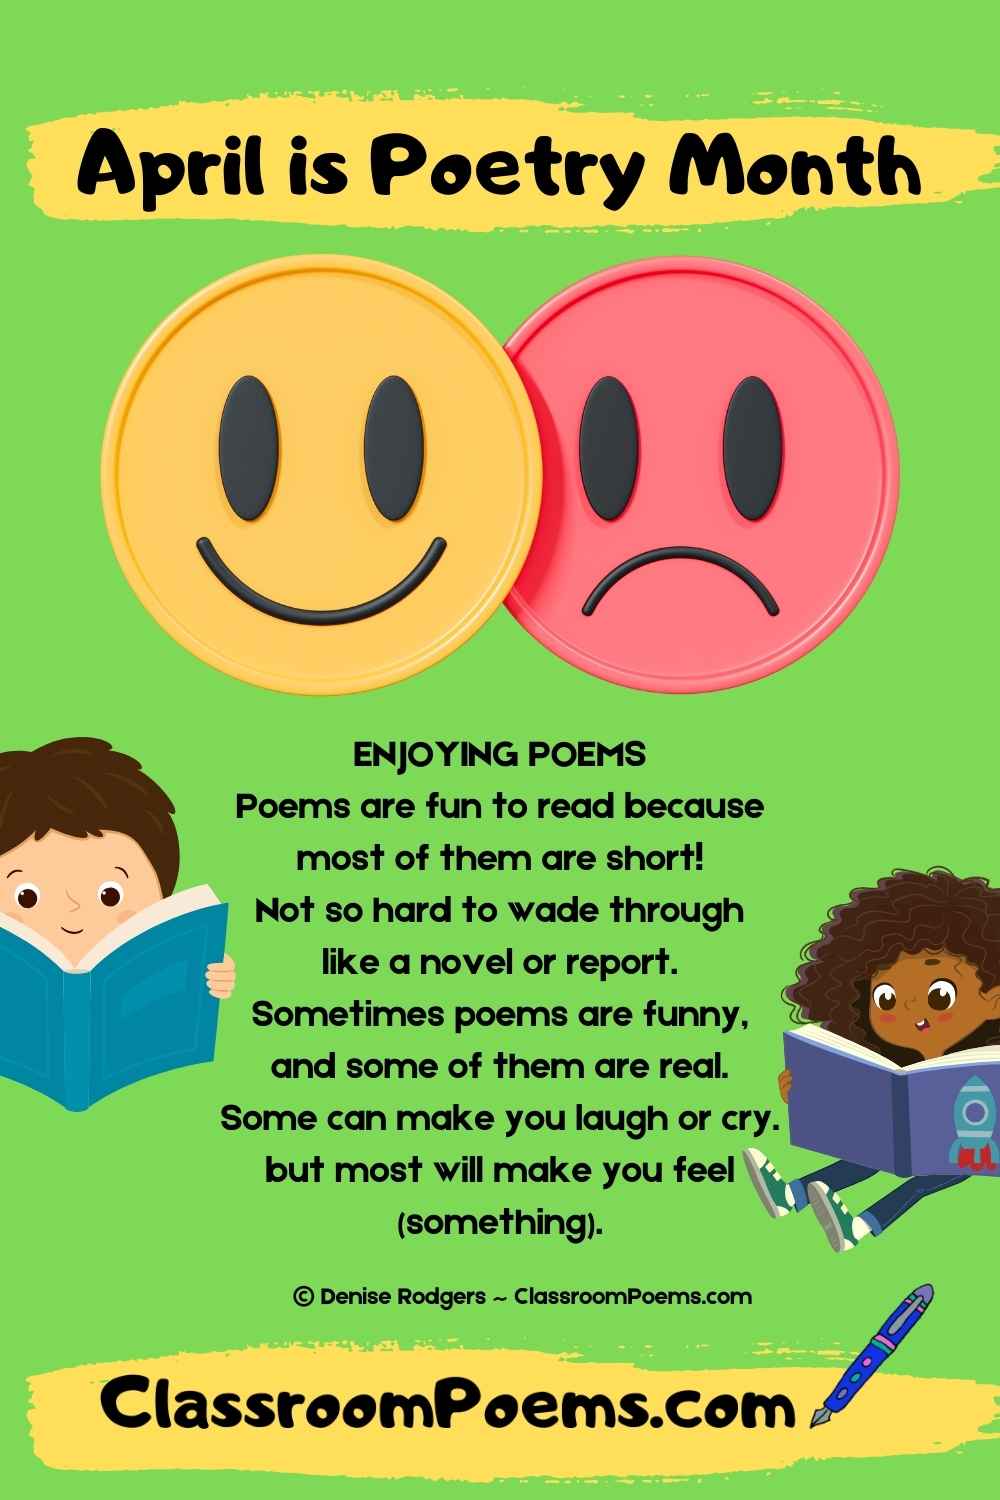 Enjoy a Poem of the Week by Denise Rodgers on ClassroomPoems.com